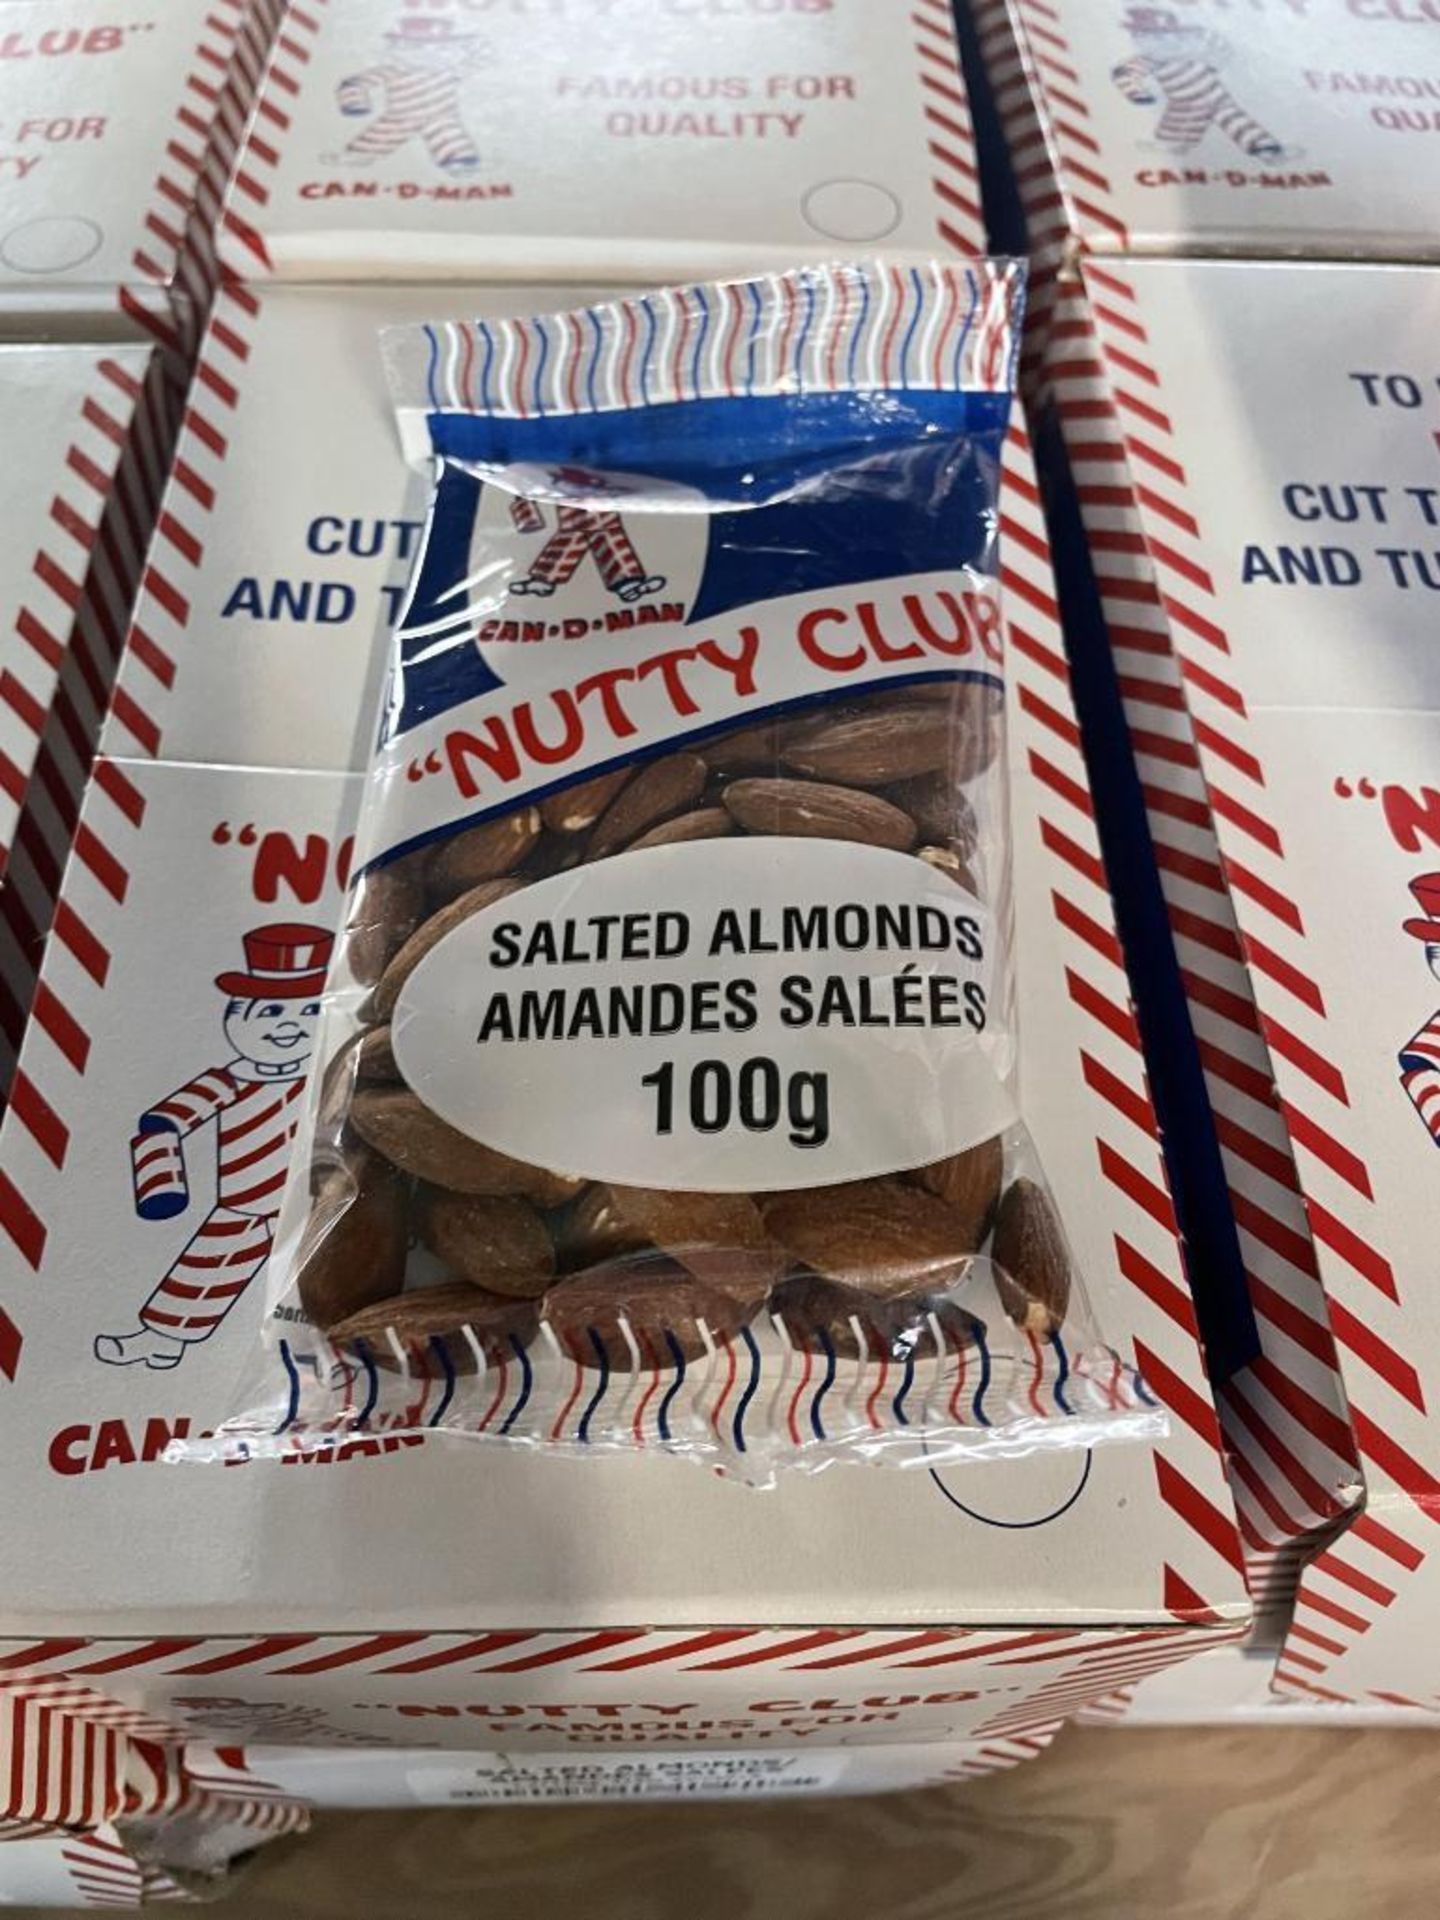 (22) BOXES OF NUTTY CLUB SALTED ALMONDS, (17) 12/100B PER BOX & (5) 12/50G PER BOX - Image 3 of 5